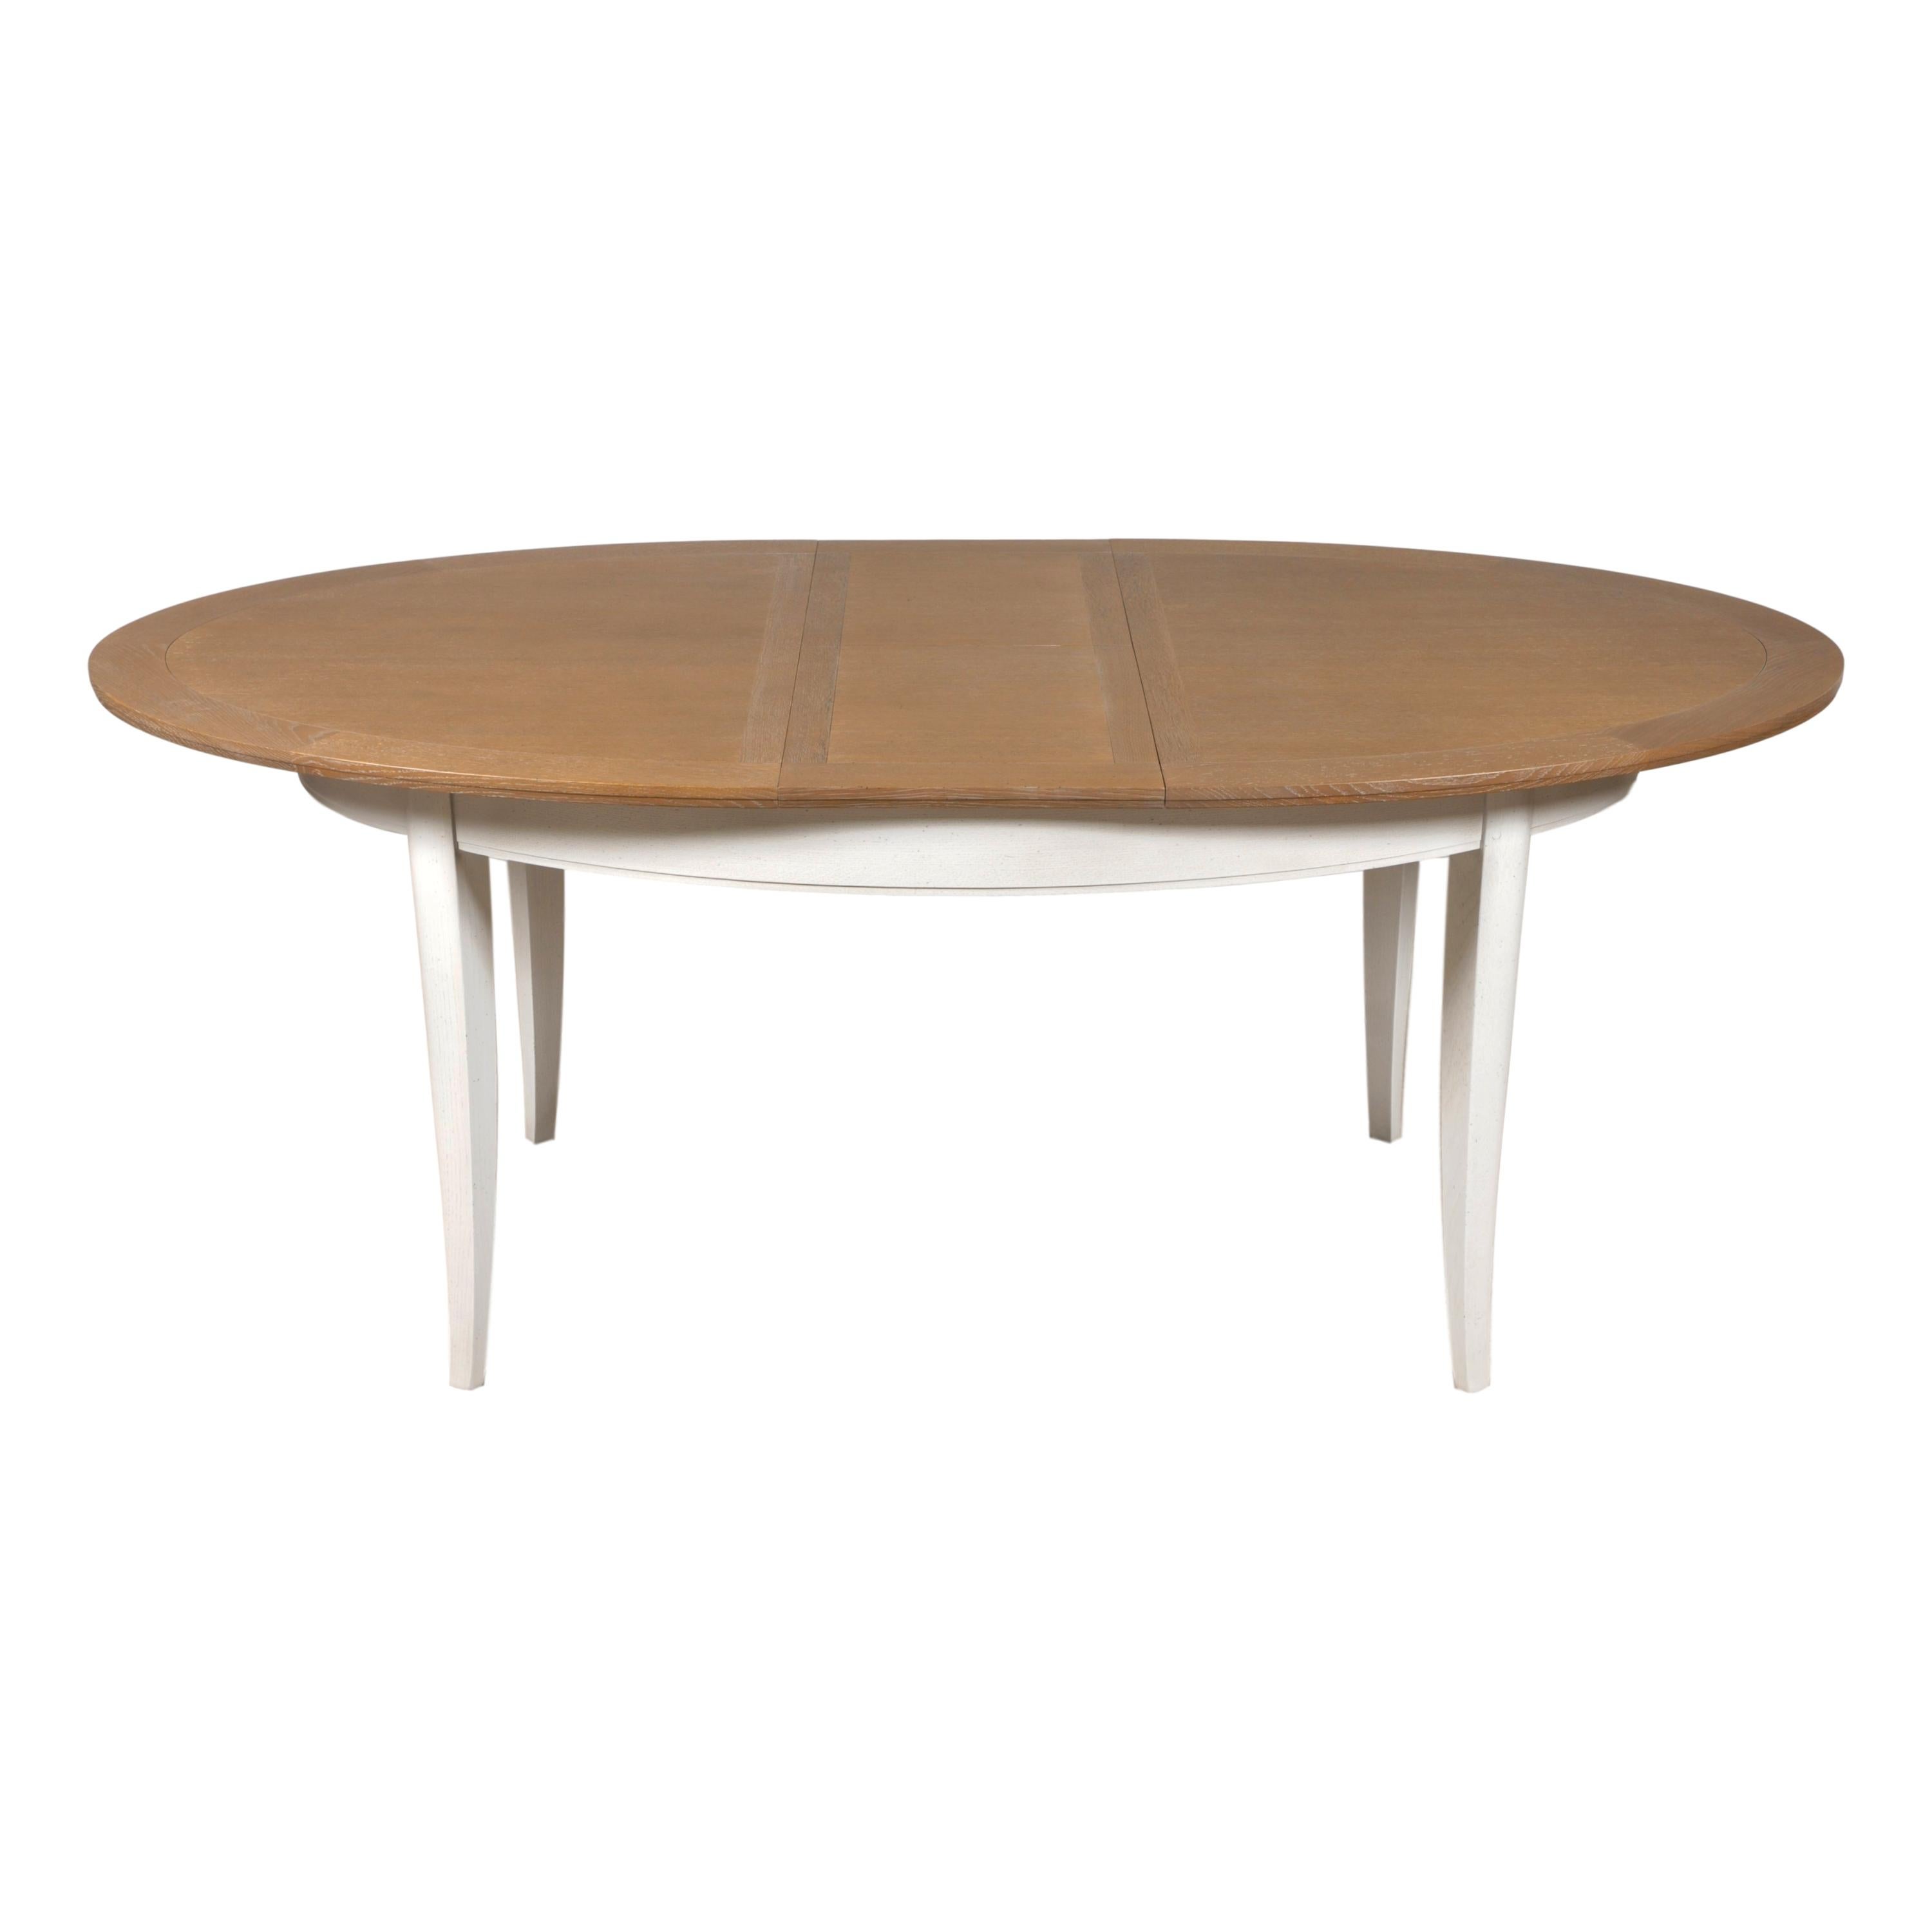 This oval dining table's design is typical of the French provincial actual and classical style.

This table integrates 2 folded extensions of 40 cm / 16